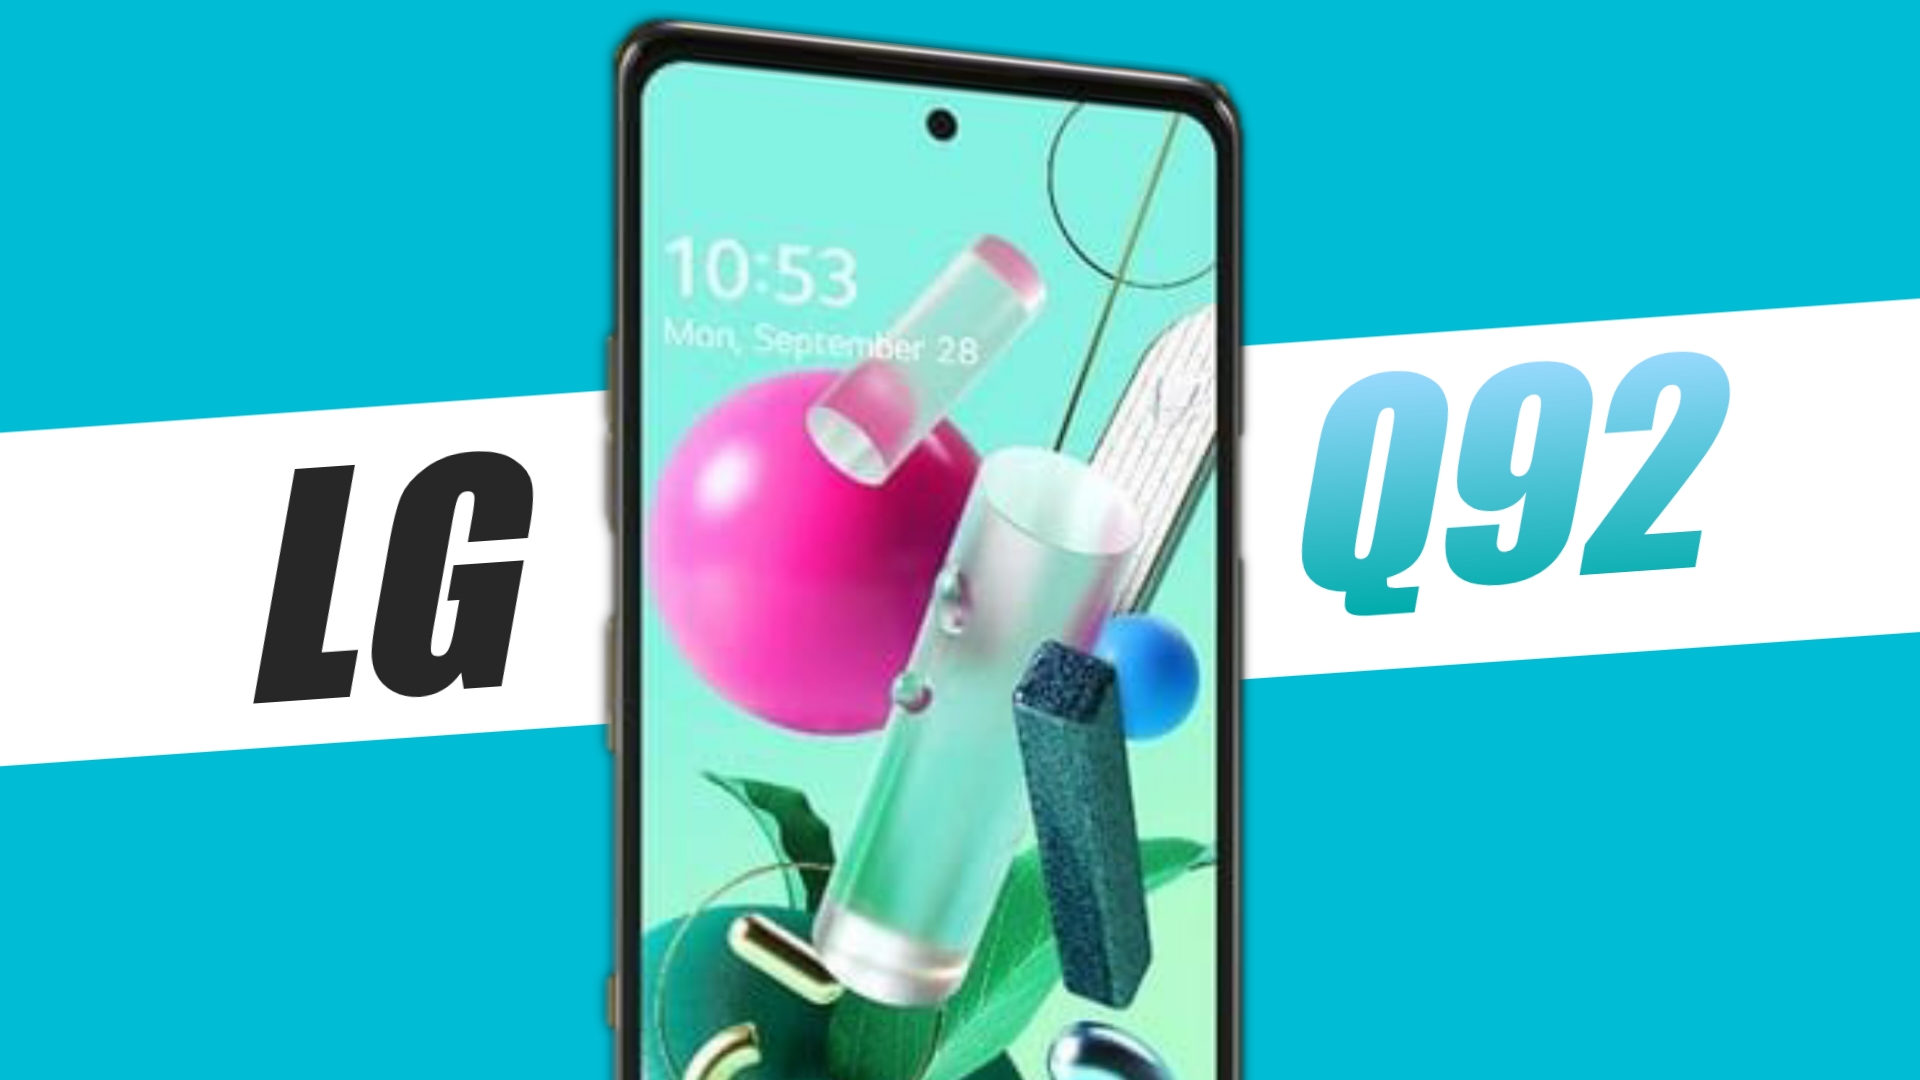 LG Q92 with Snapdragon 765G SoC and 6GB RAM spotted on Geekbench ahead of launch